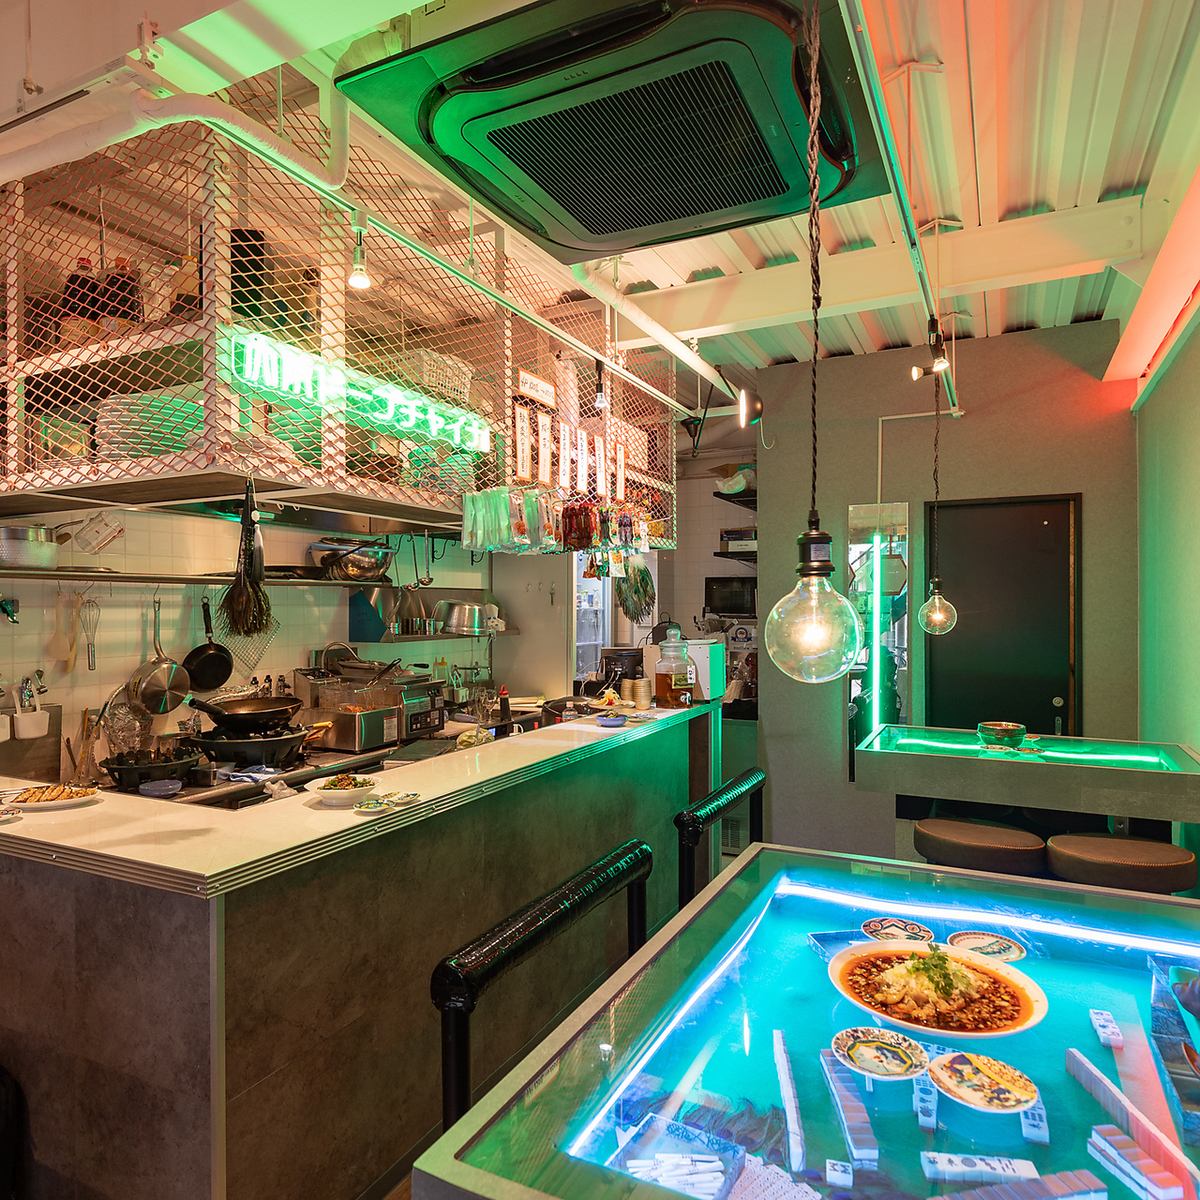 A neon izakaya that looks great on social media♪ Reasonable prices for students